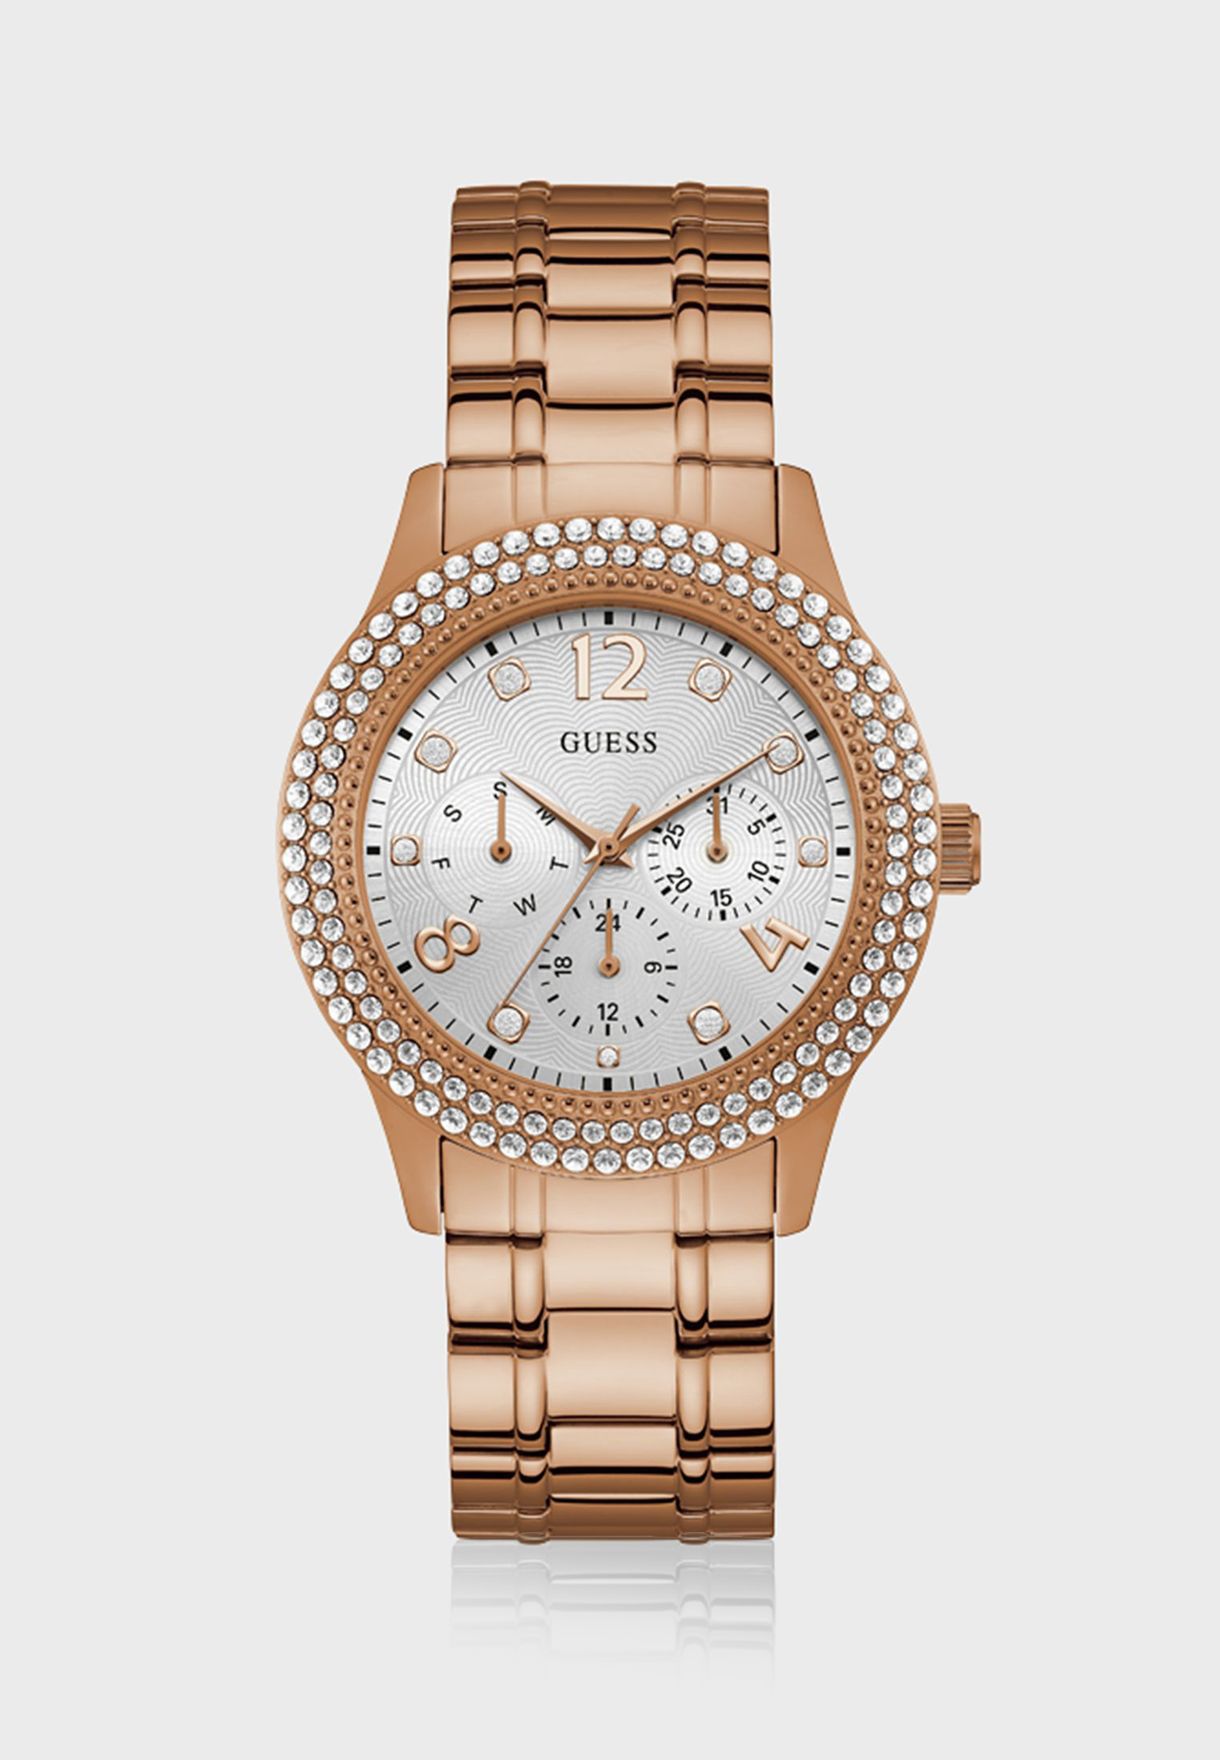 Bedazzle Crystal Analog Watch